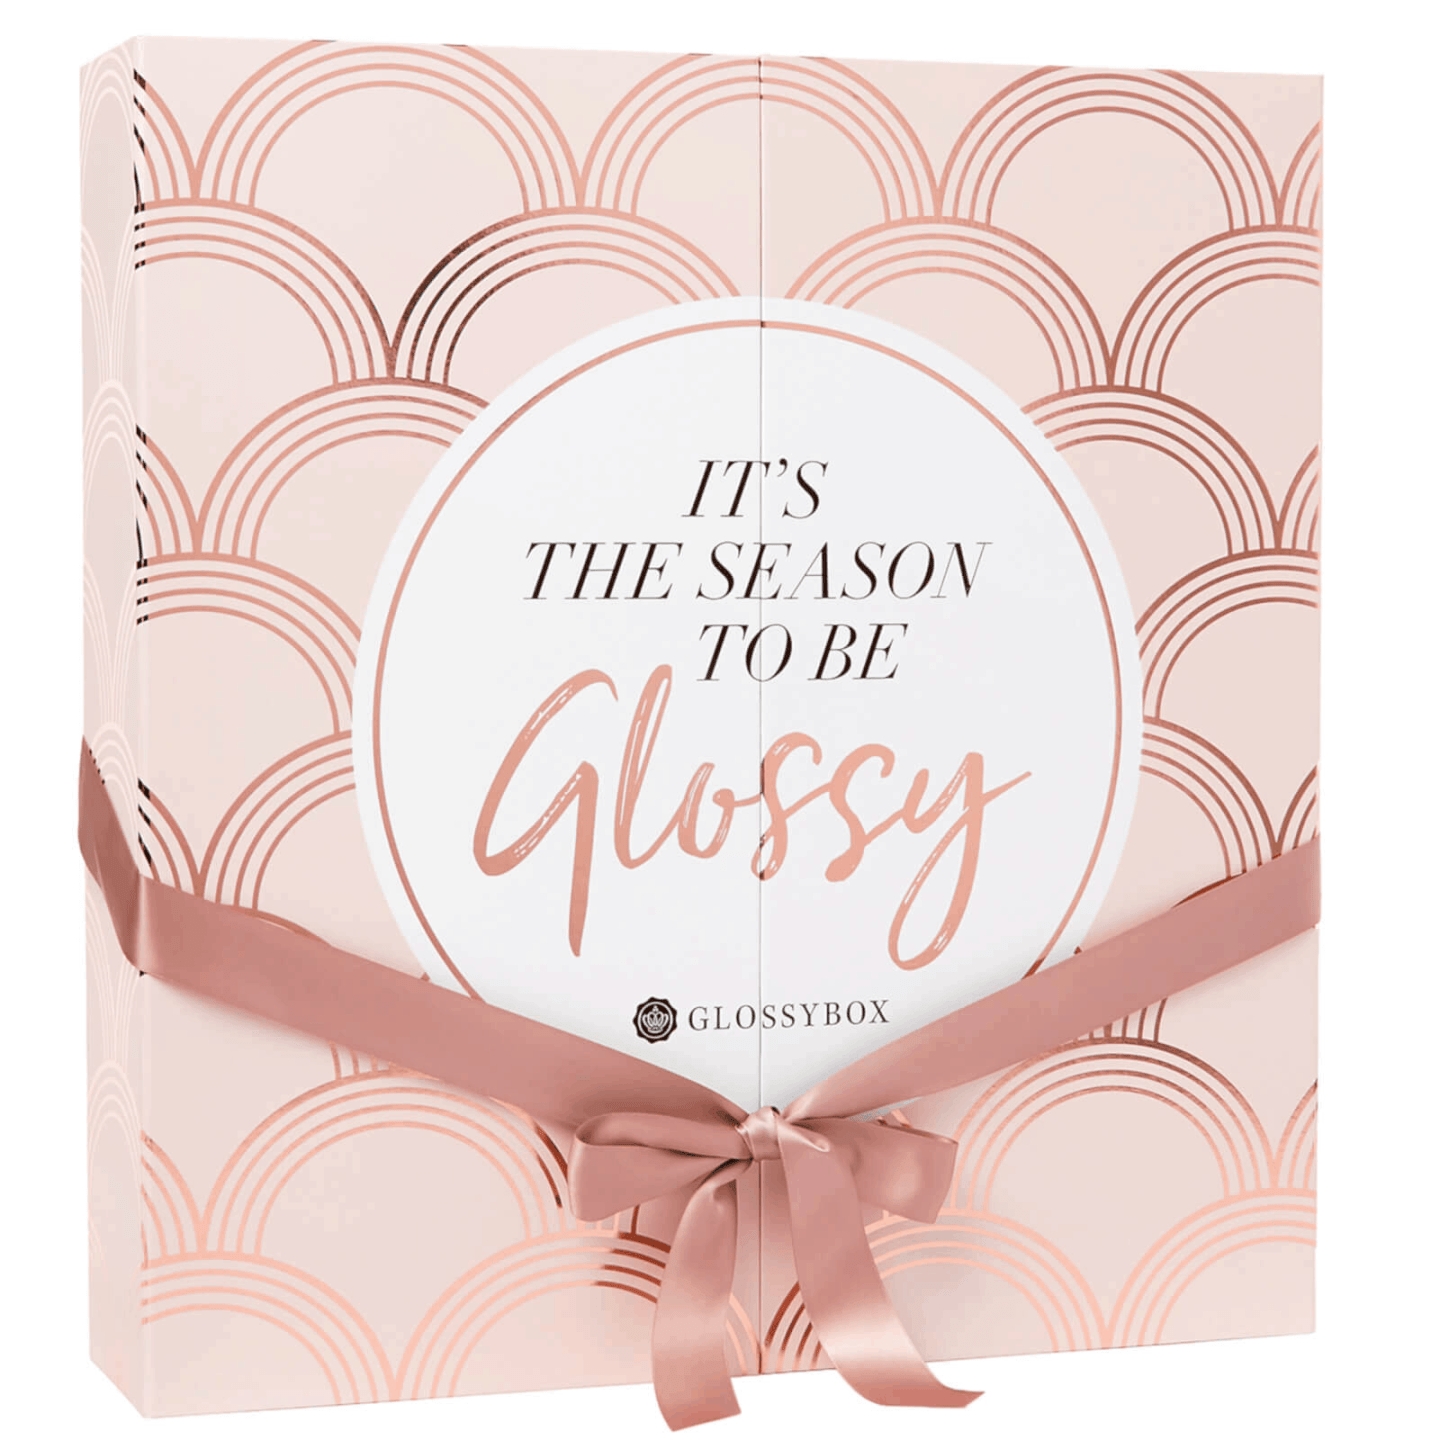 2019 GLOSSYBOX Advent Calendar Available Now + Full Spoilers! Hello